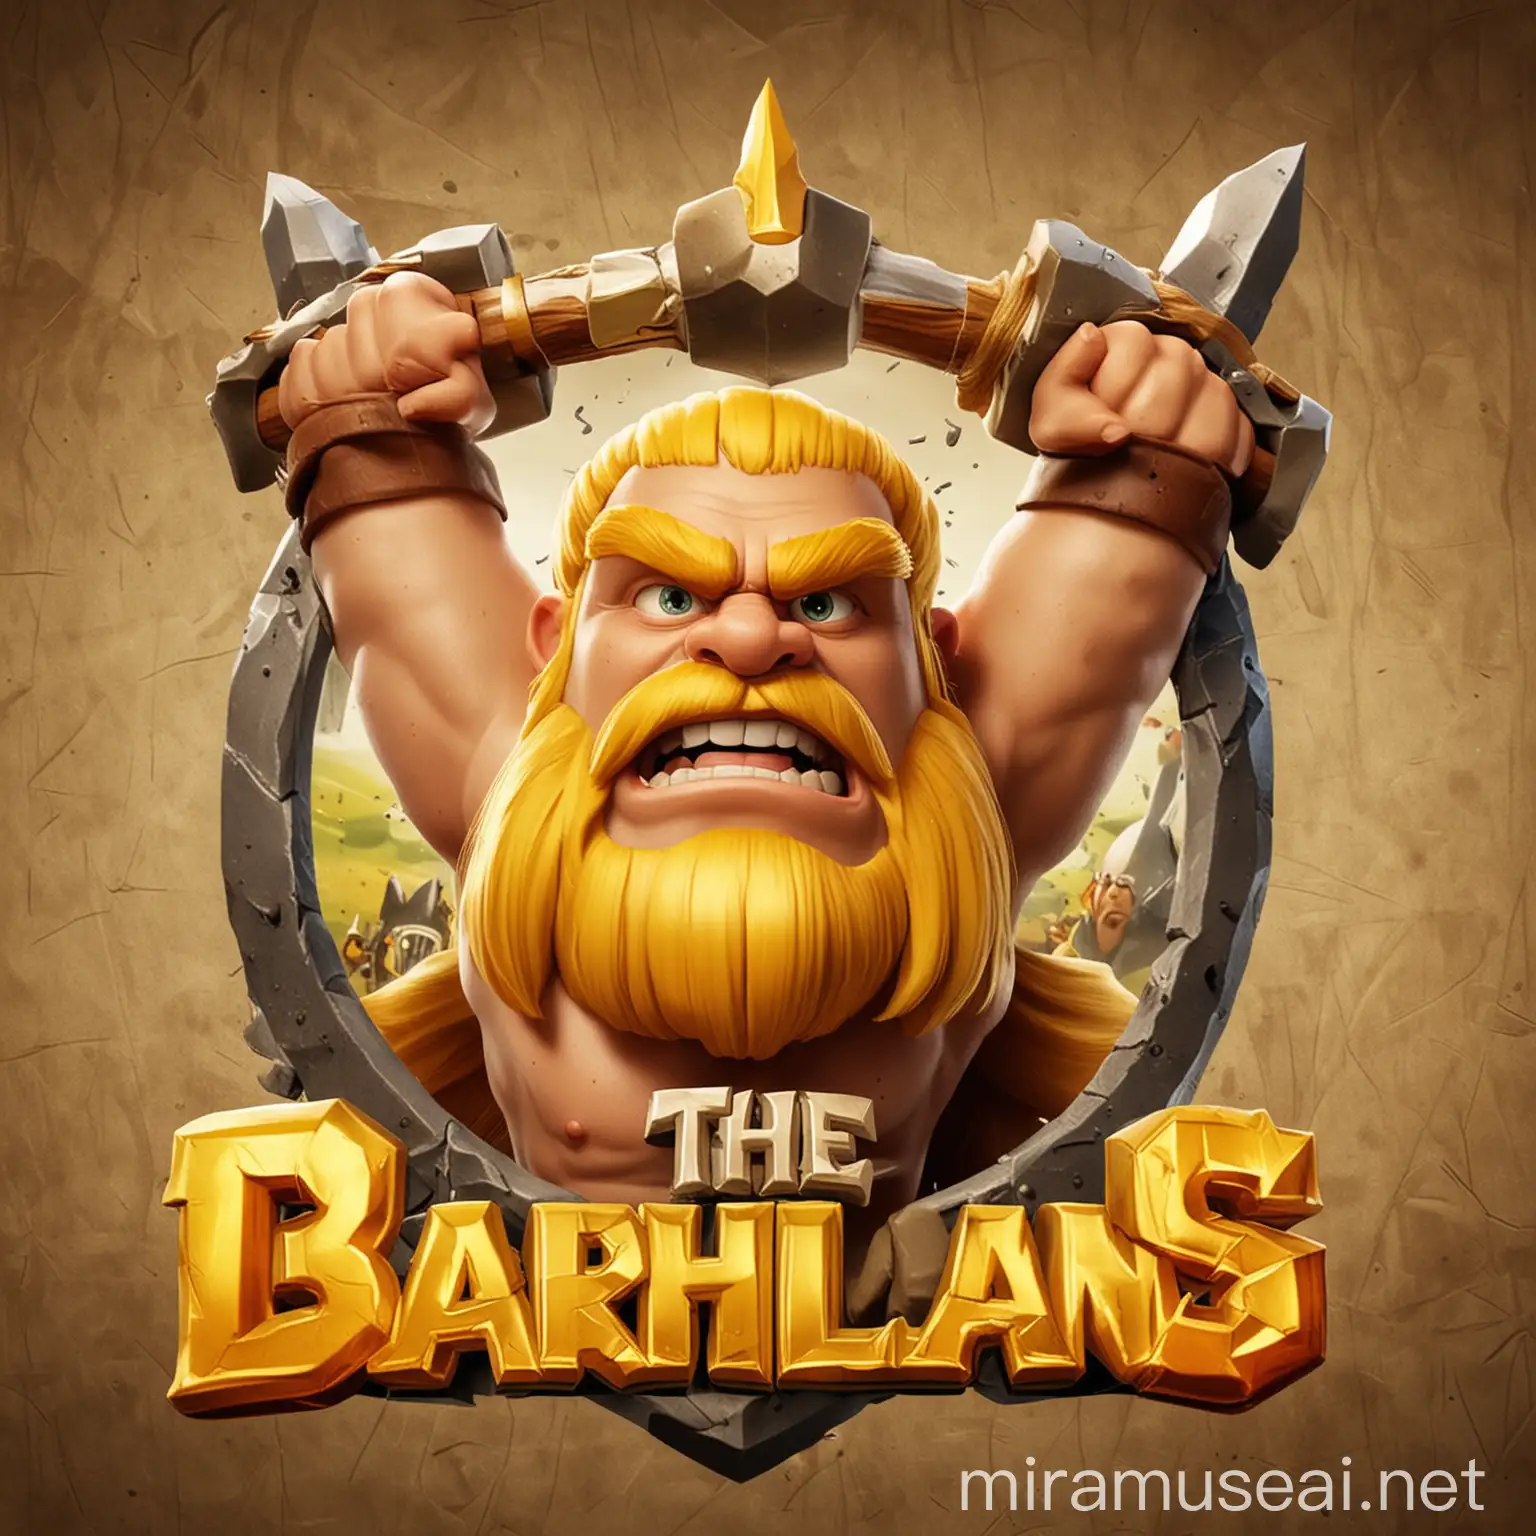 Clash of Clans Clan Logo The Barbillions with Golden Barbarian Character